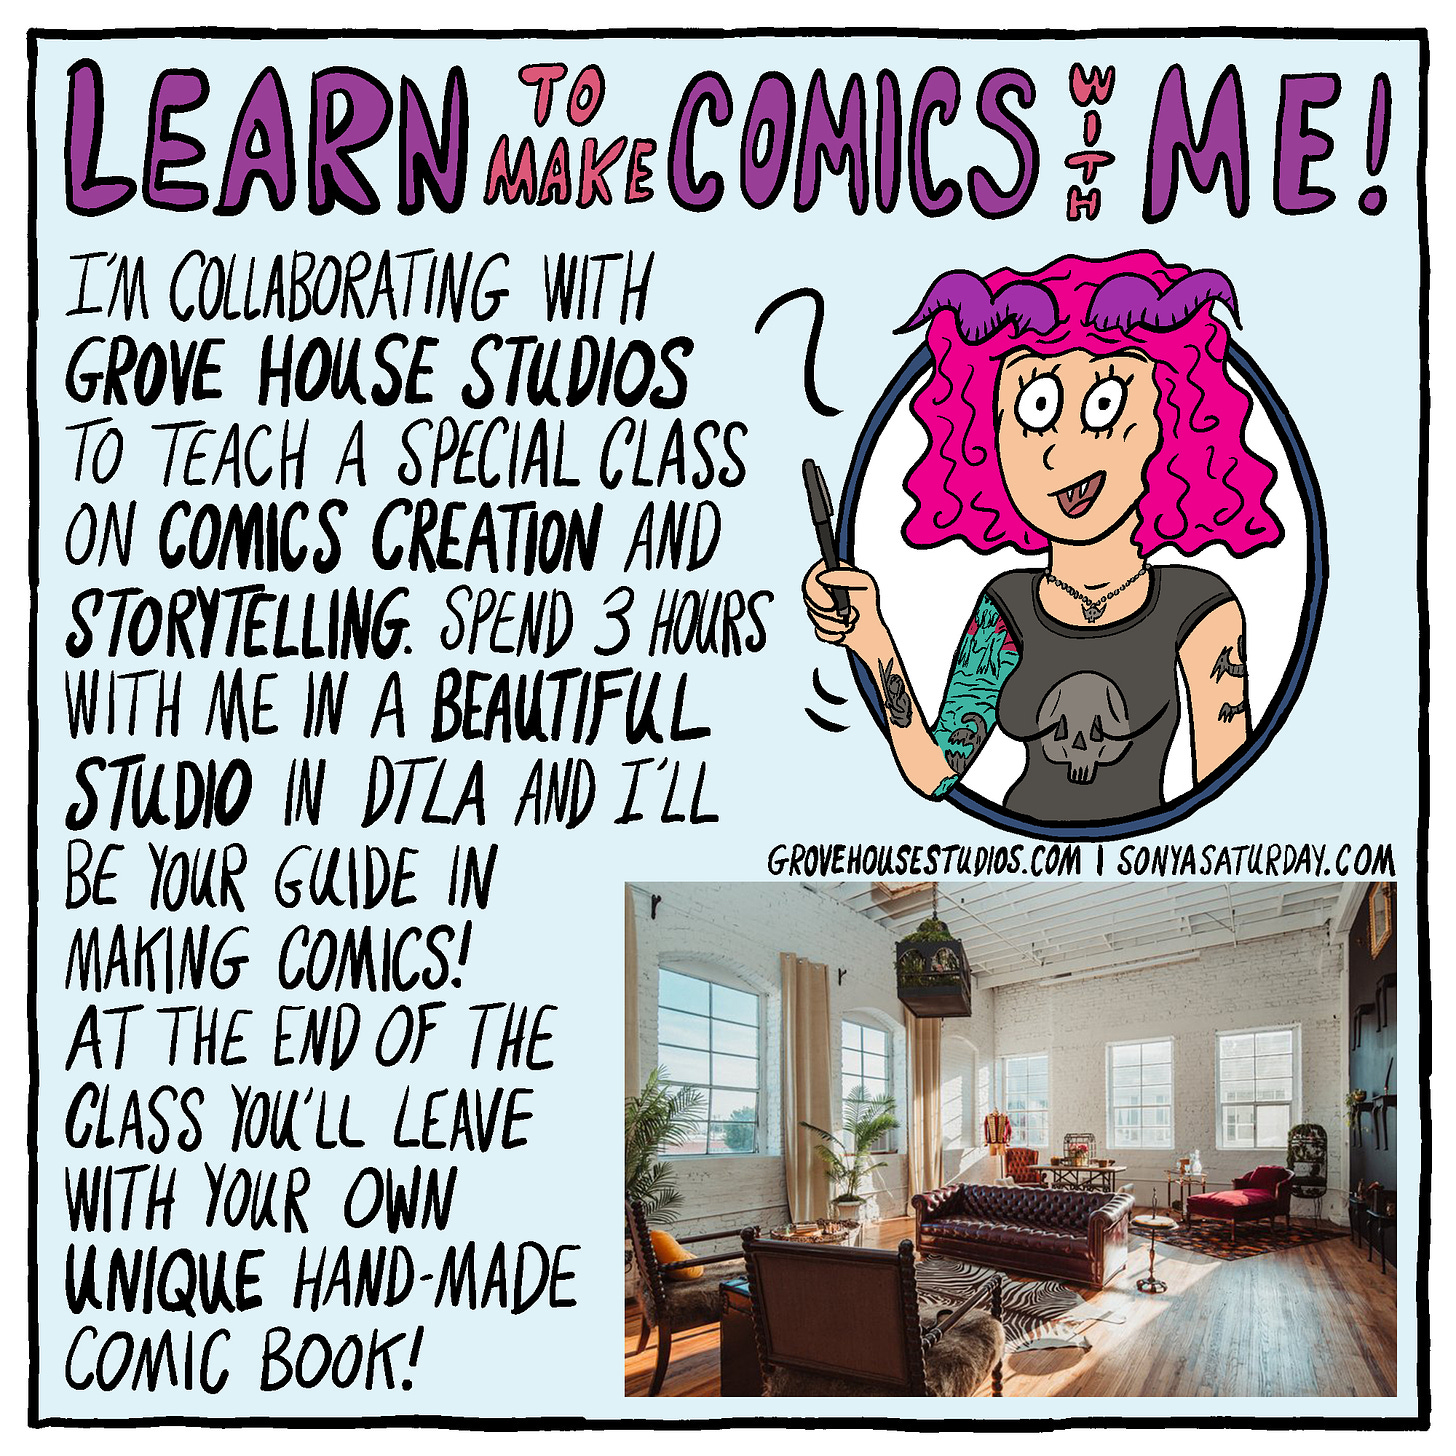 I'm collaborating with Grove House Studios to teach a special class on Comics Creation and Storytelling. Spend 3 hours with me in a beautiful studio in DTLA and I'll be your guide in making comics! At the end of the class you'll leave with your own unique hand-made comic book!